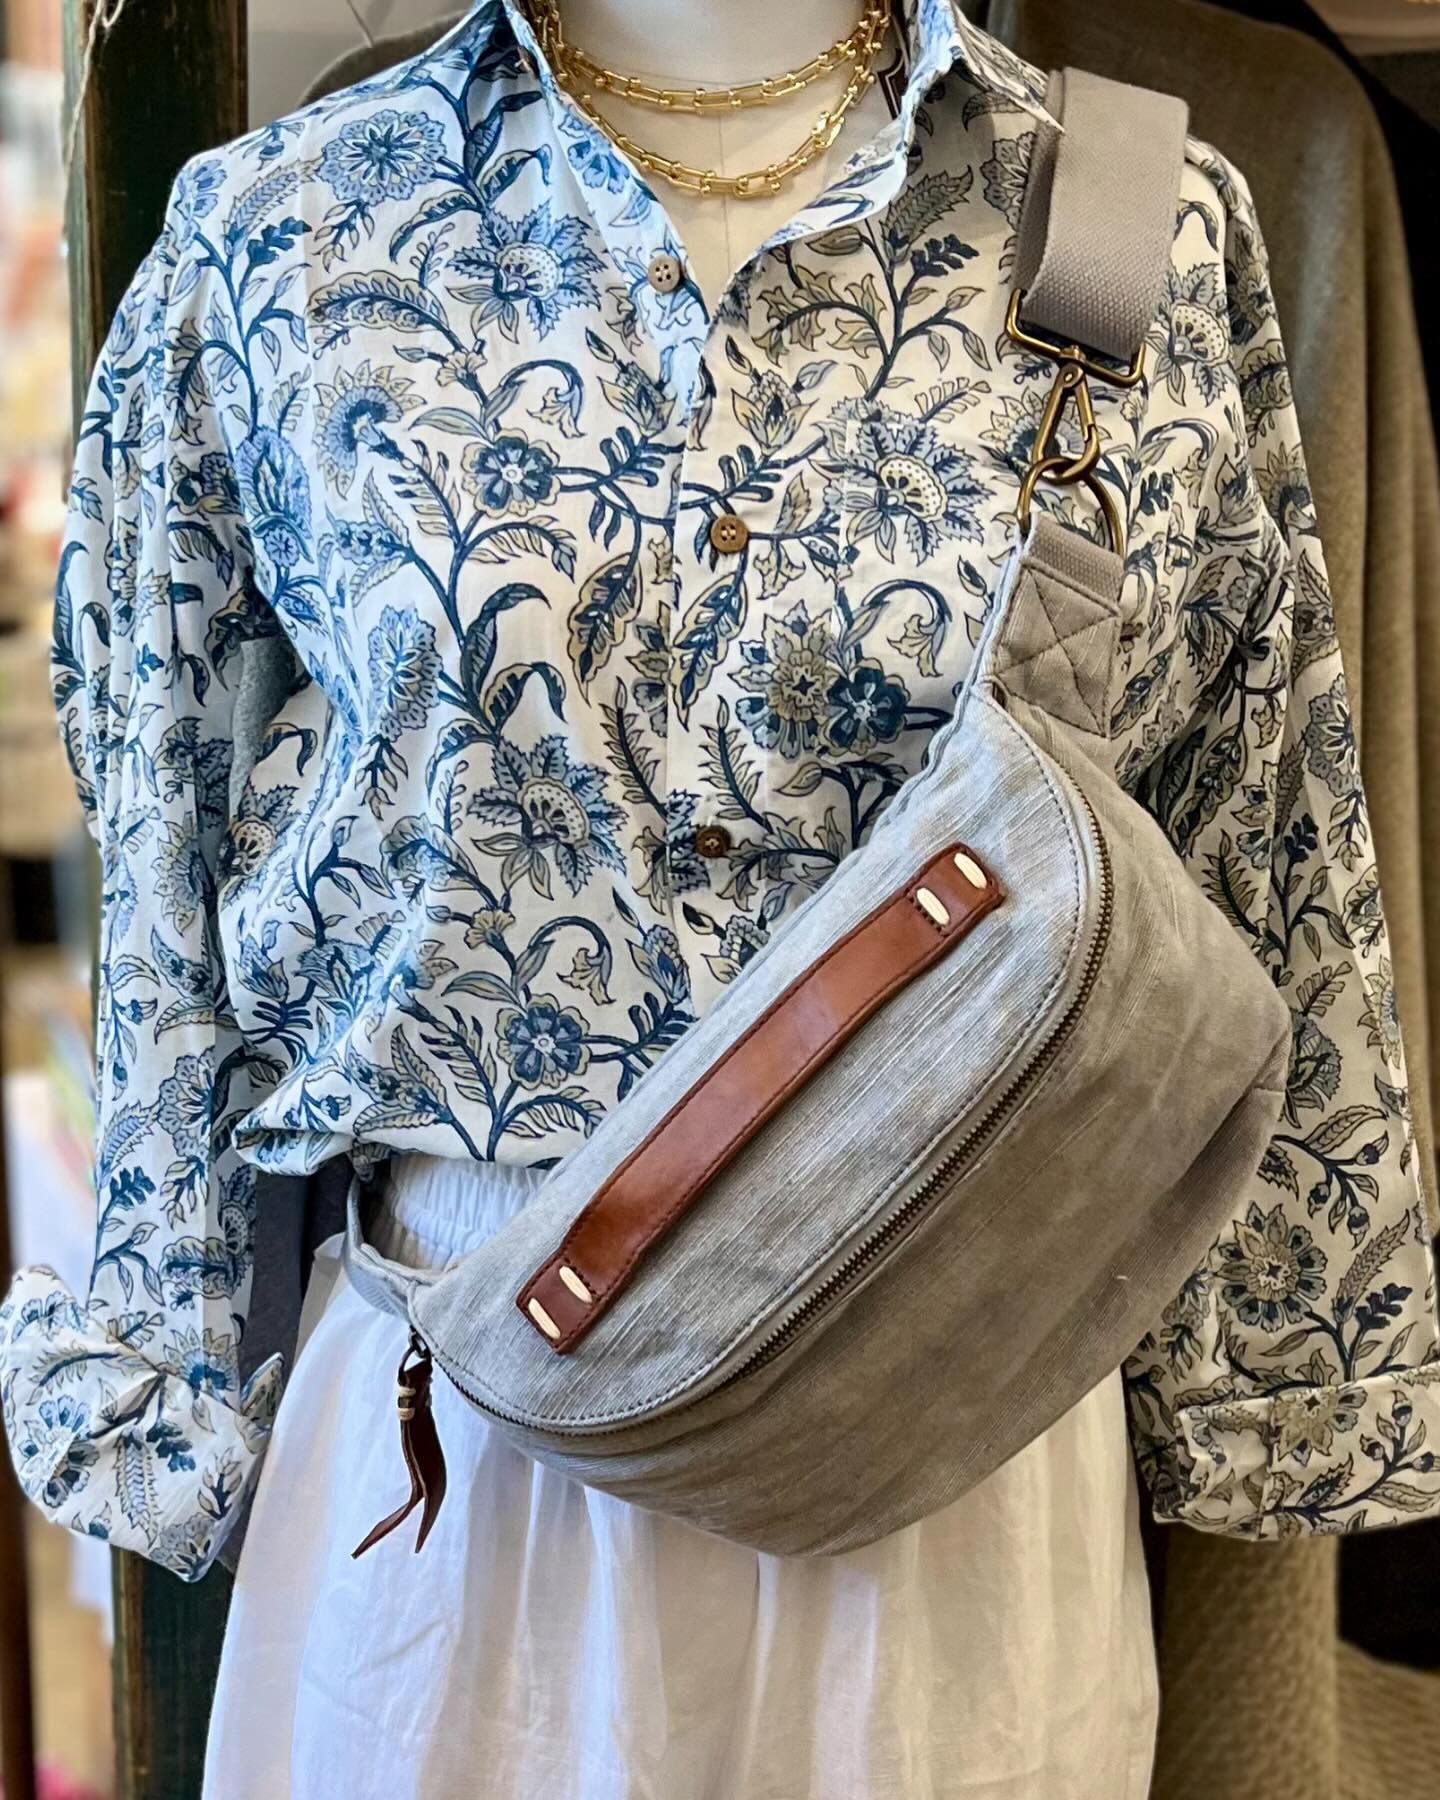 Perfect for this long travel weekend, our EJ block printed shirt and @49sqmi canvas bumbag. Shop our spring/summer collection in SF, Woodside and Montecito opening in July. #ejtravels #blockprint #canvas #49sqmi #summeressentials